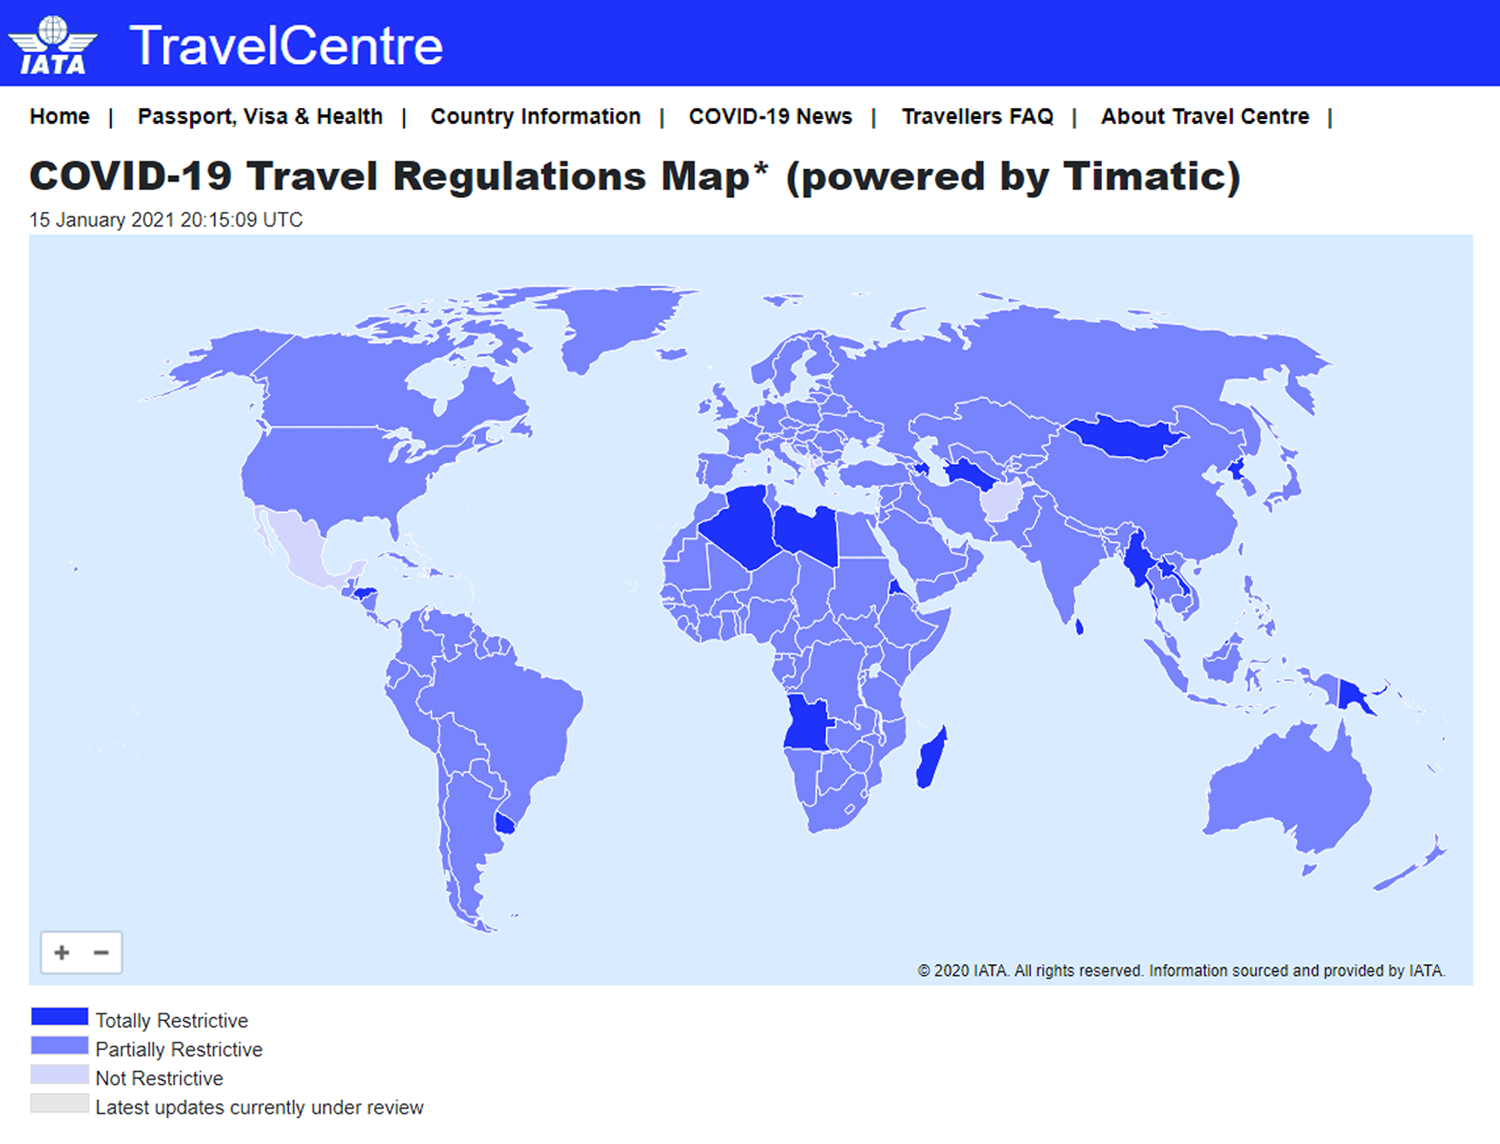 Stay Up to Date with the Latest COVID19 Travel Restrictions Direct